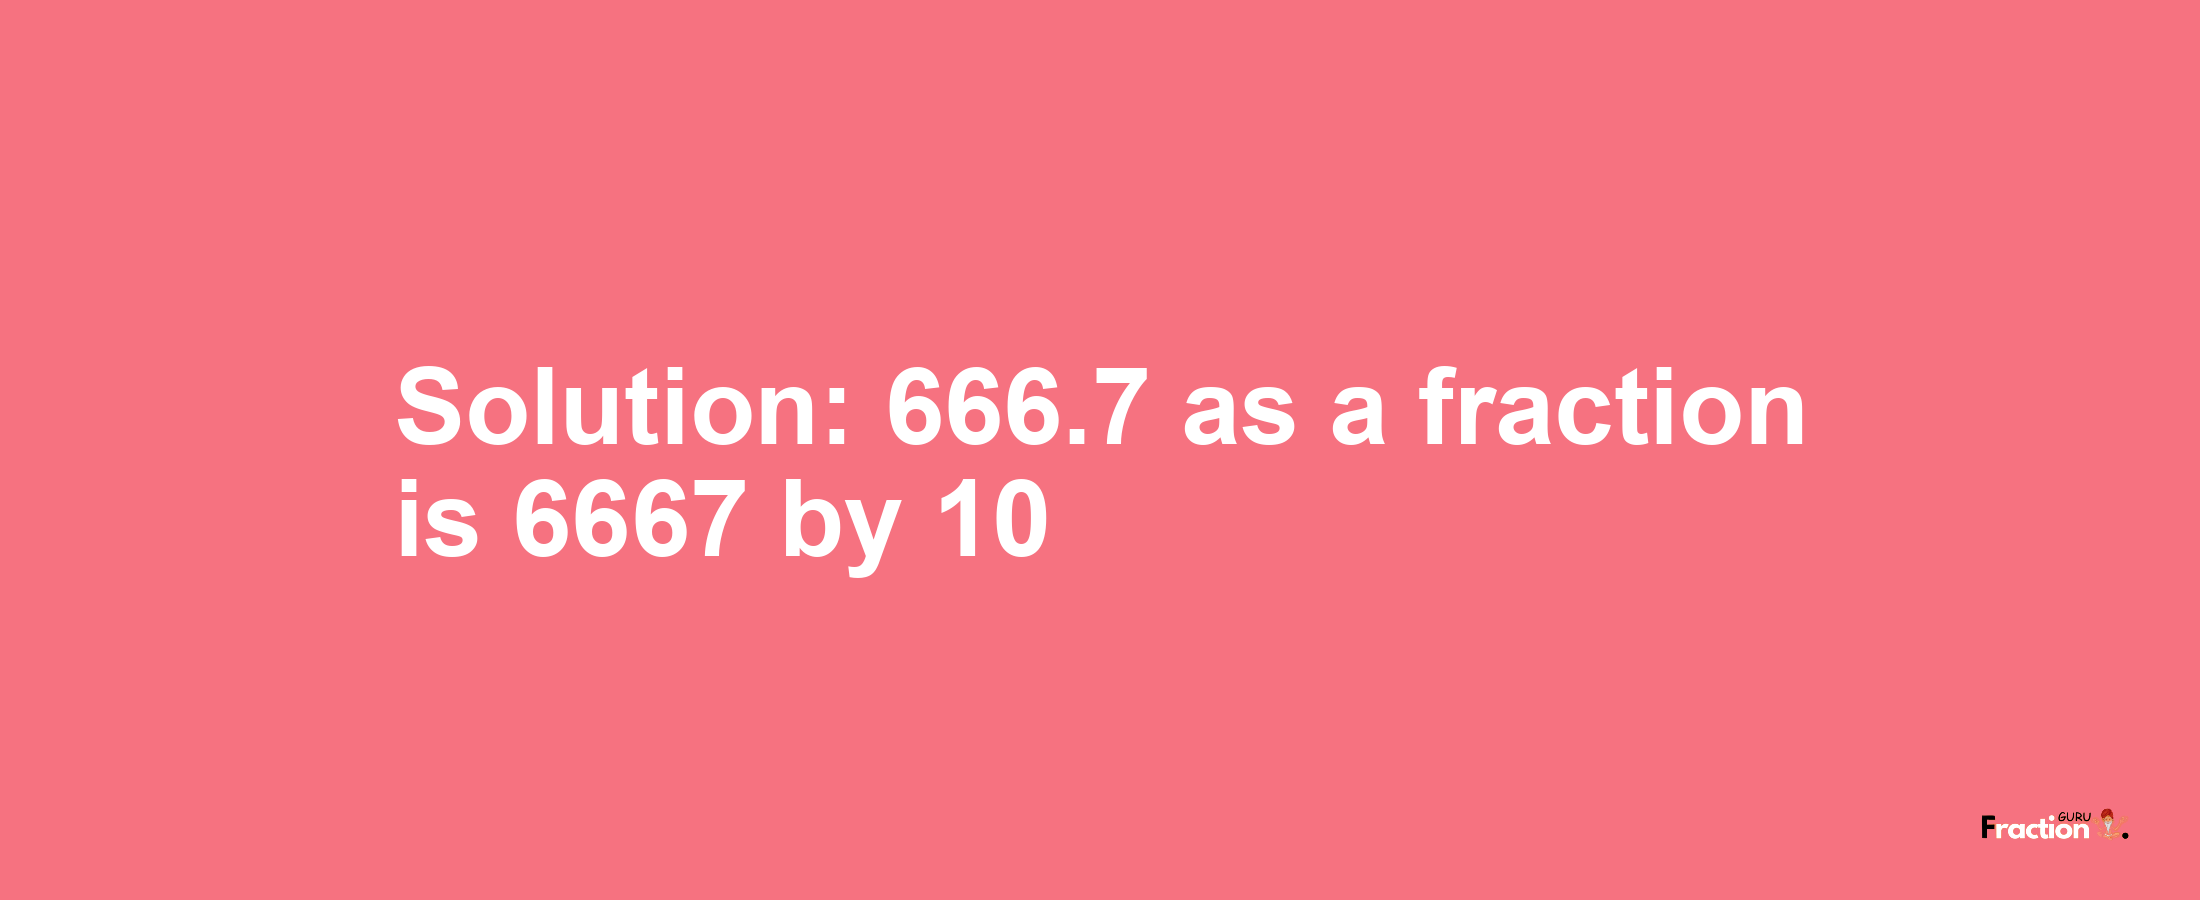 Solution:666.7 as a fraction is 6667/10